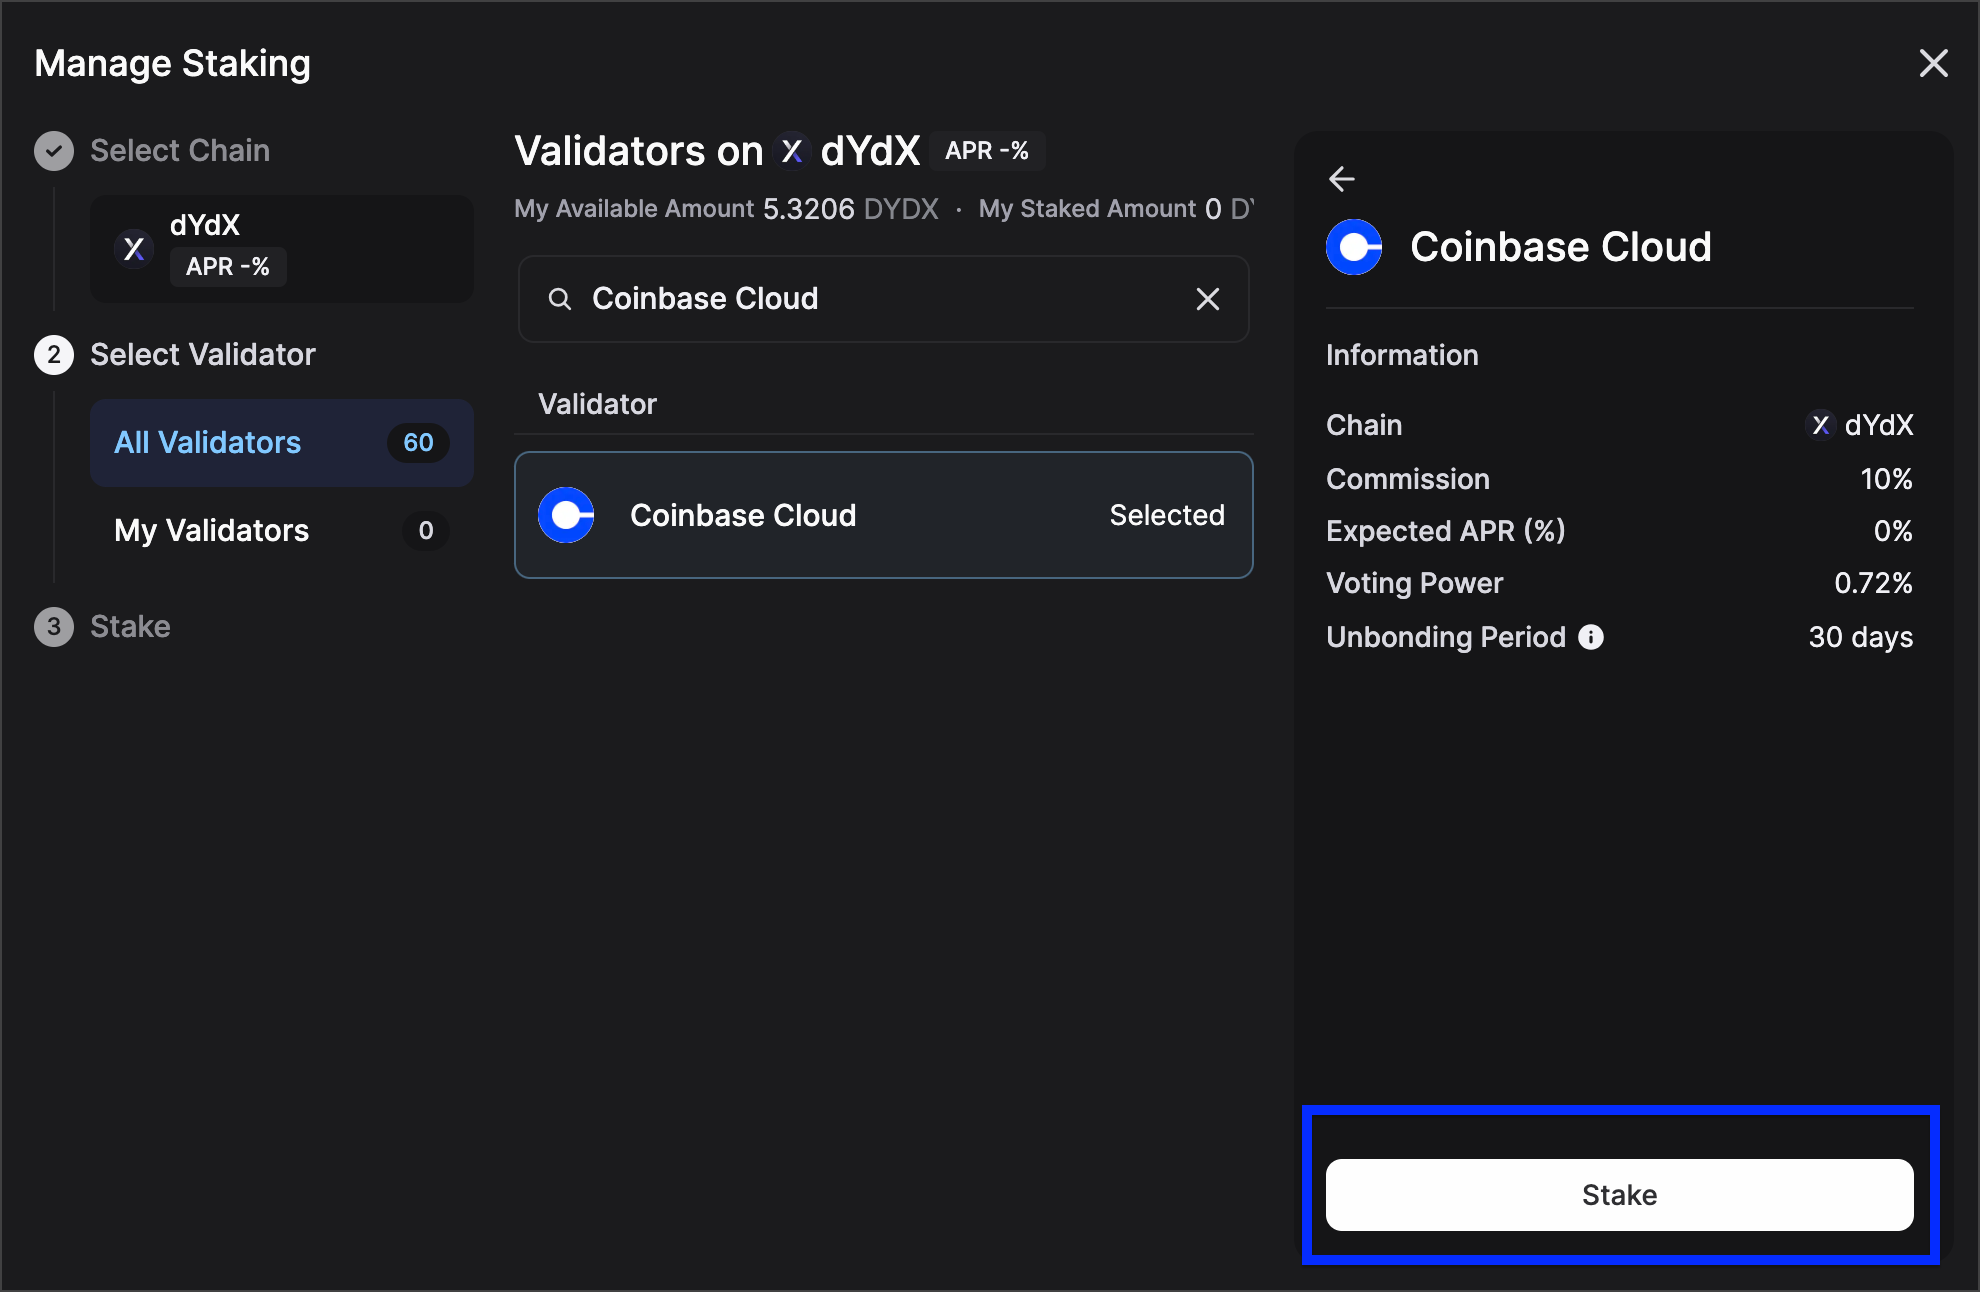 When you select the Coinbase Cloud validator, the delegation details display on the right and the Stake button displays underneath.